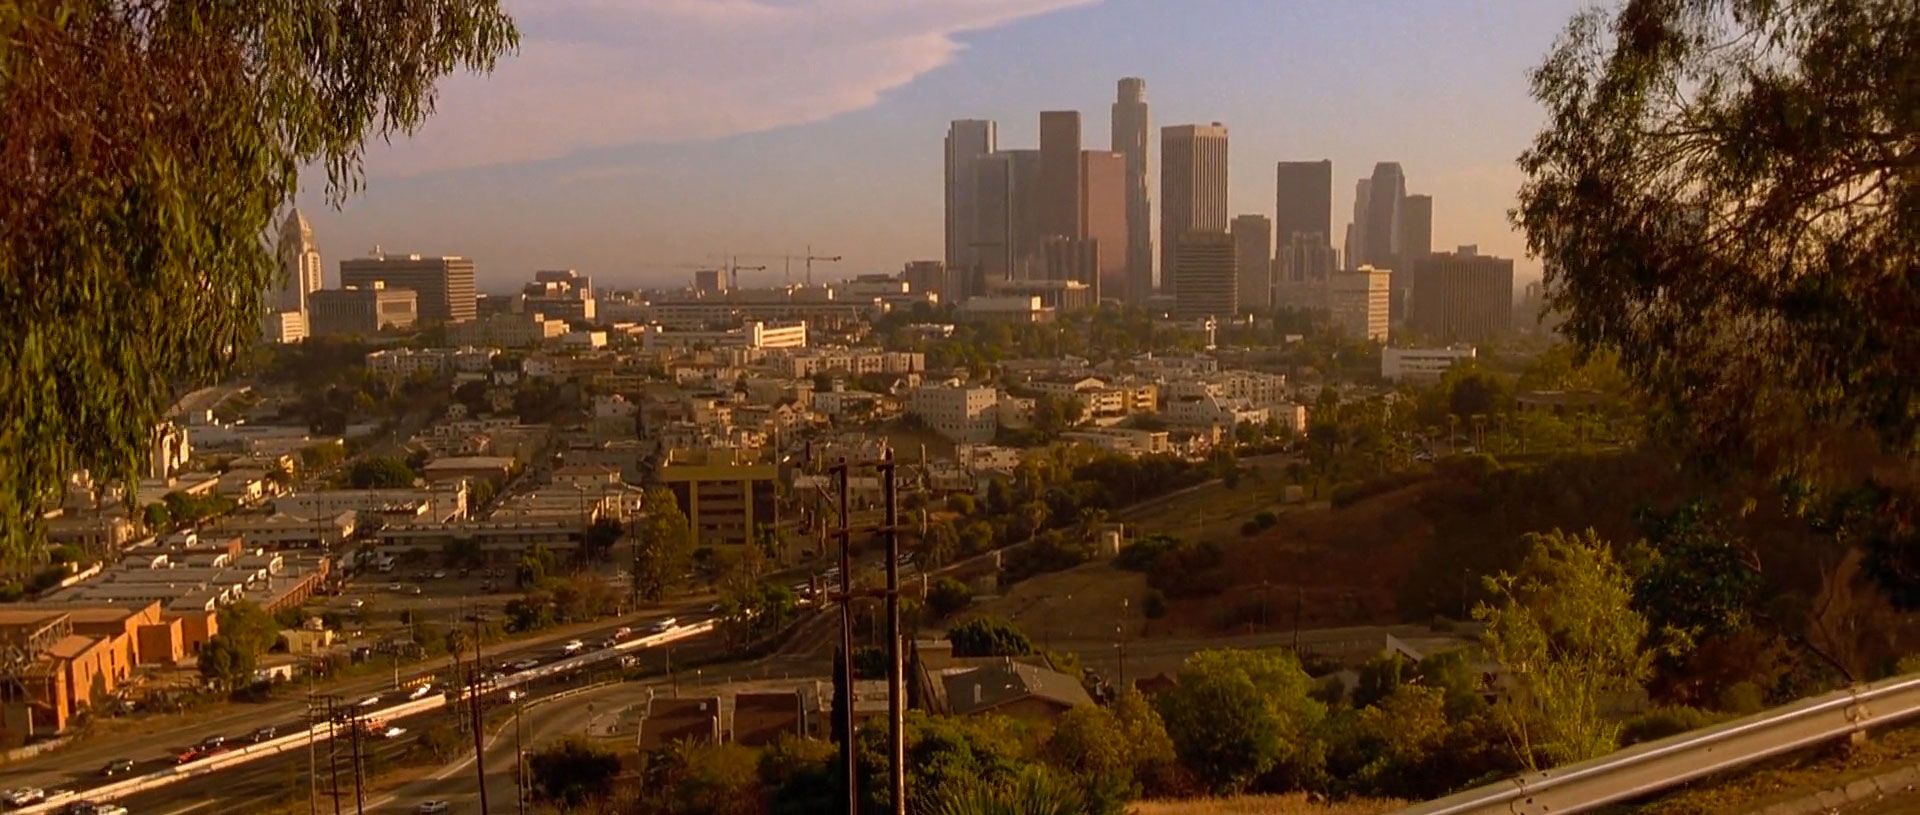 Los Angeles | The Fast and the Furious Wiki | FANDOM powered by Wikia1920 x 815